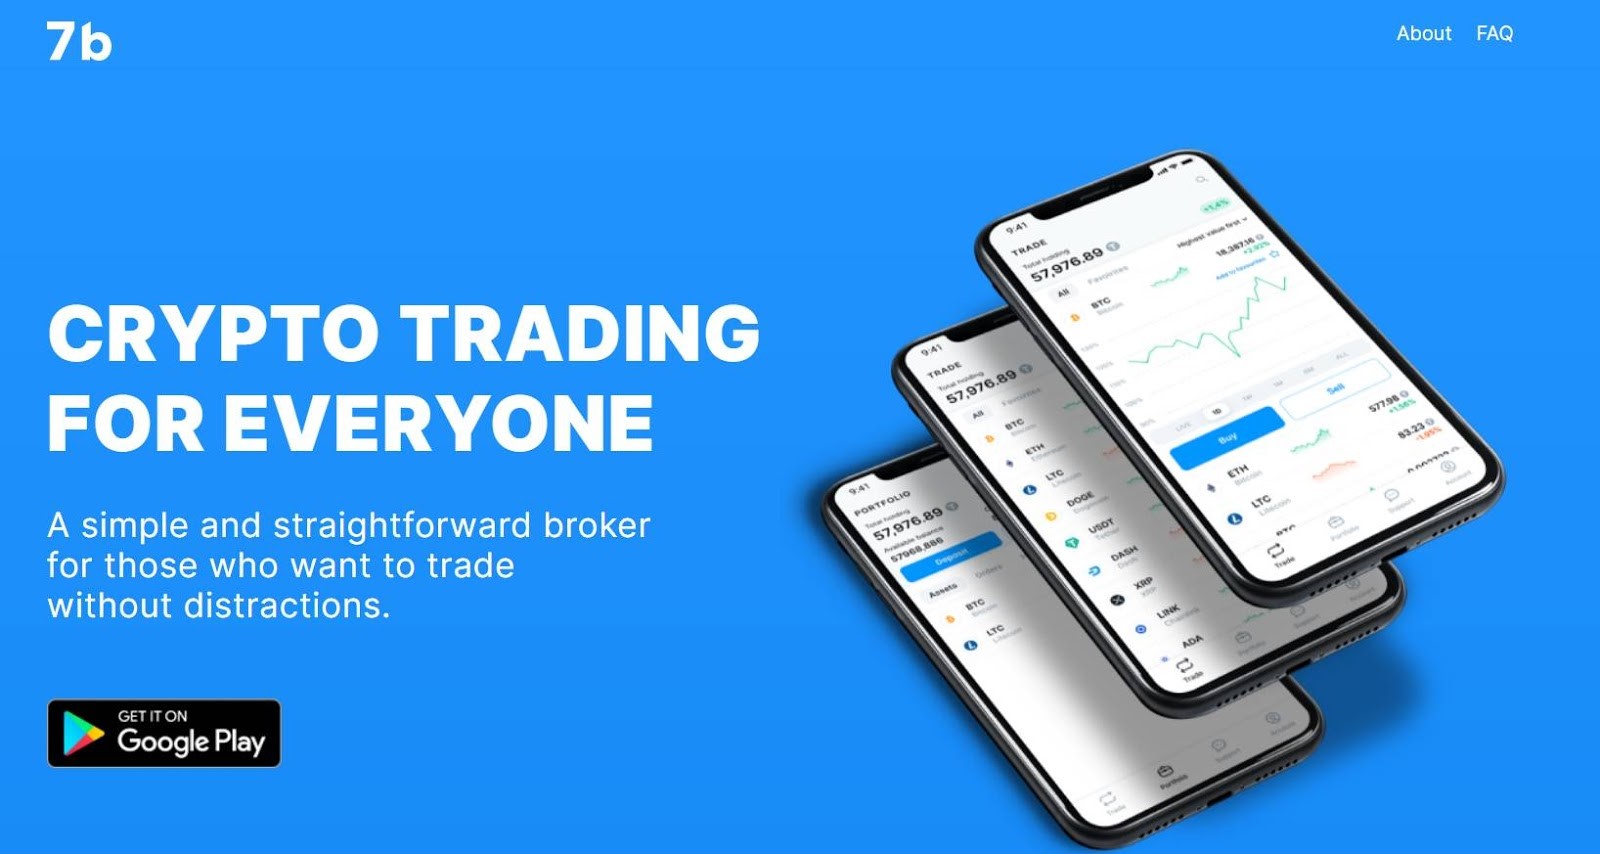 Crypto Brokers. Are They the Best to Buy and Sell Crypto?